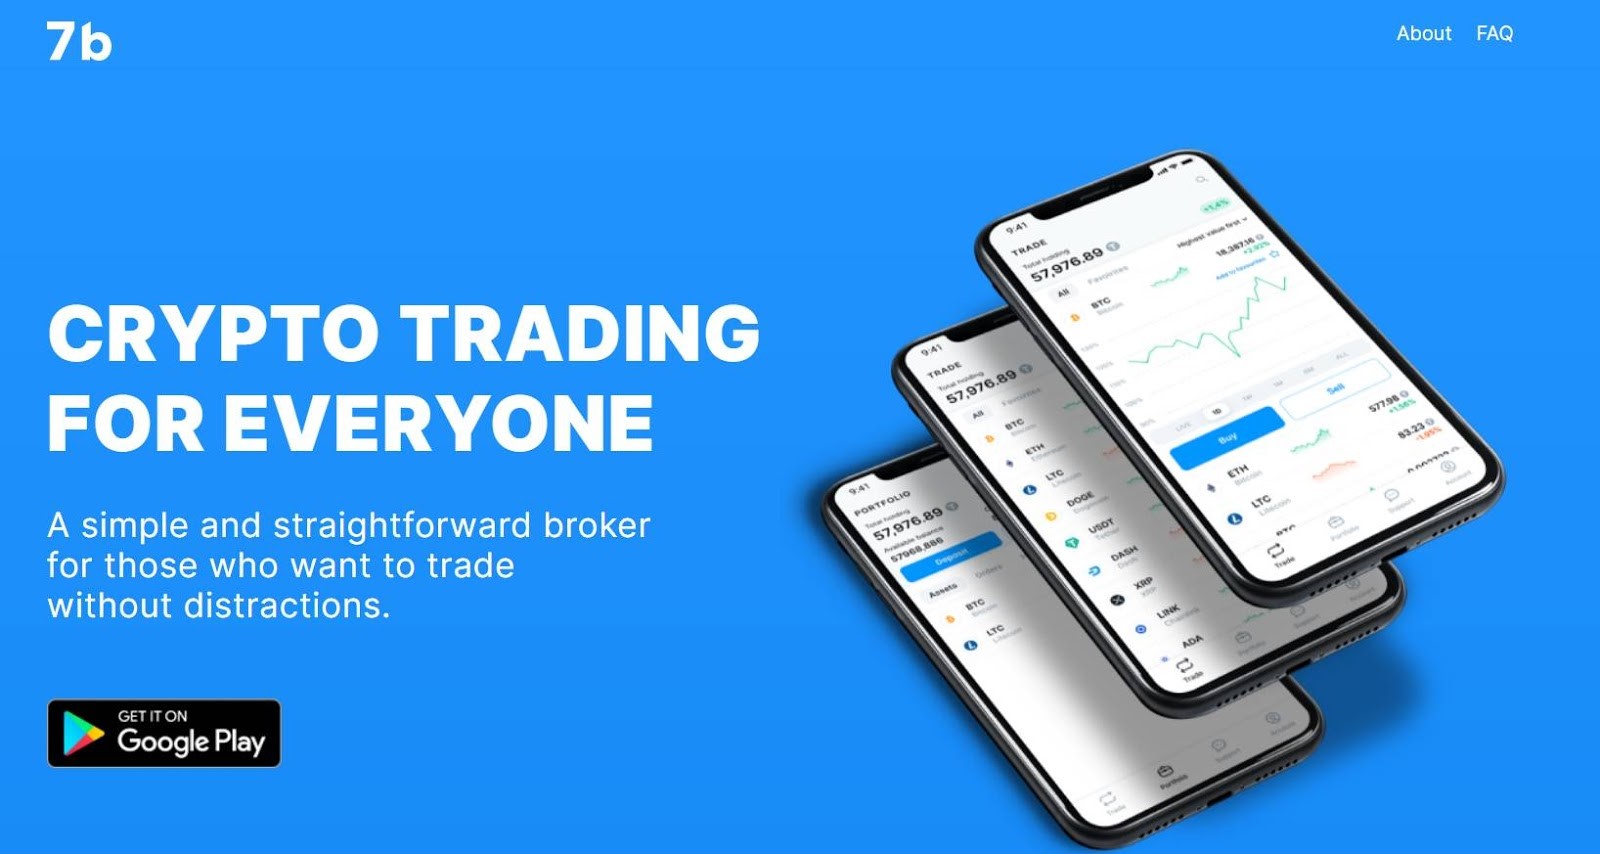 Crypto Brokers. Are They the Best to Buy and Sell Crypto?